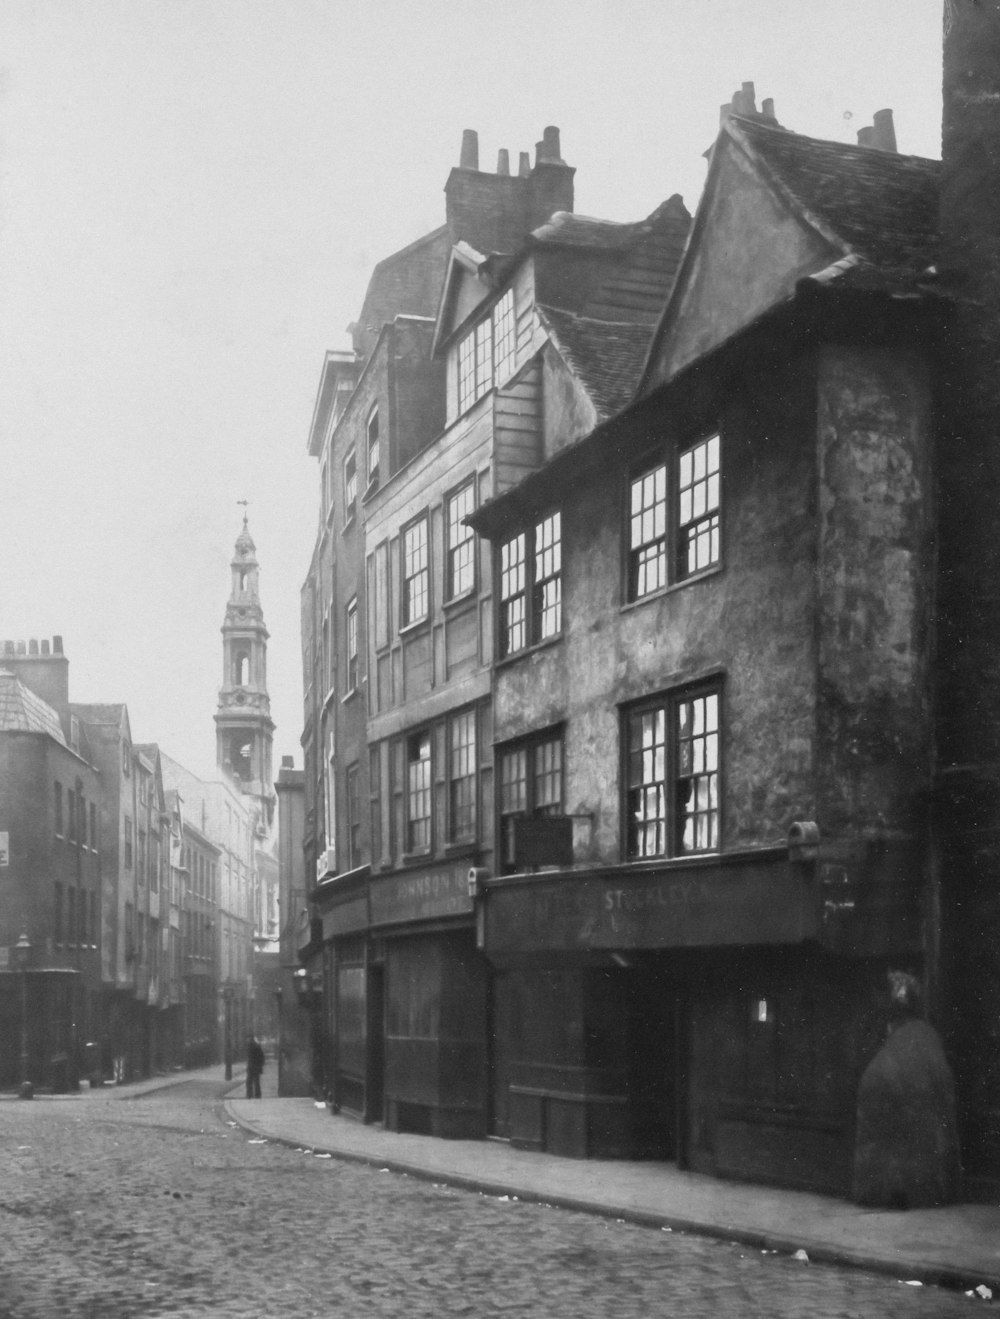 an old black and white photo of a cobblestone street